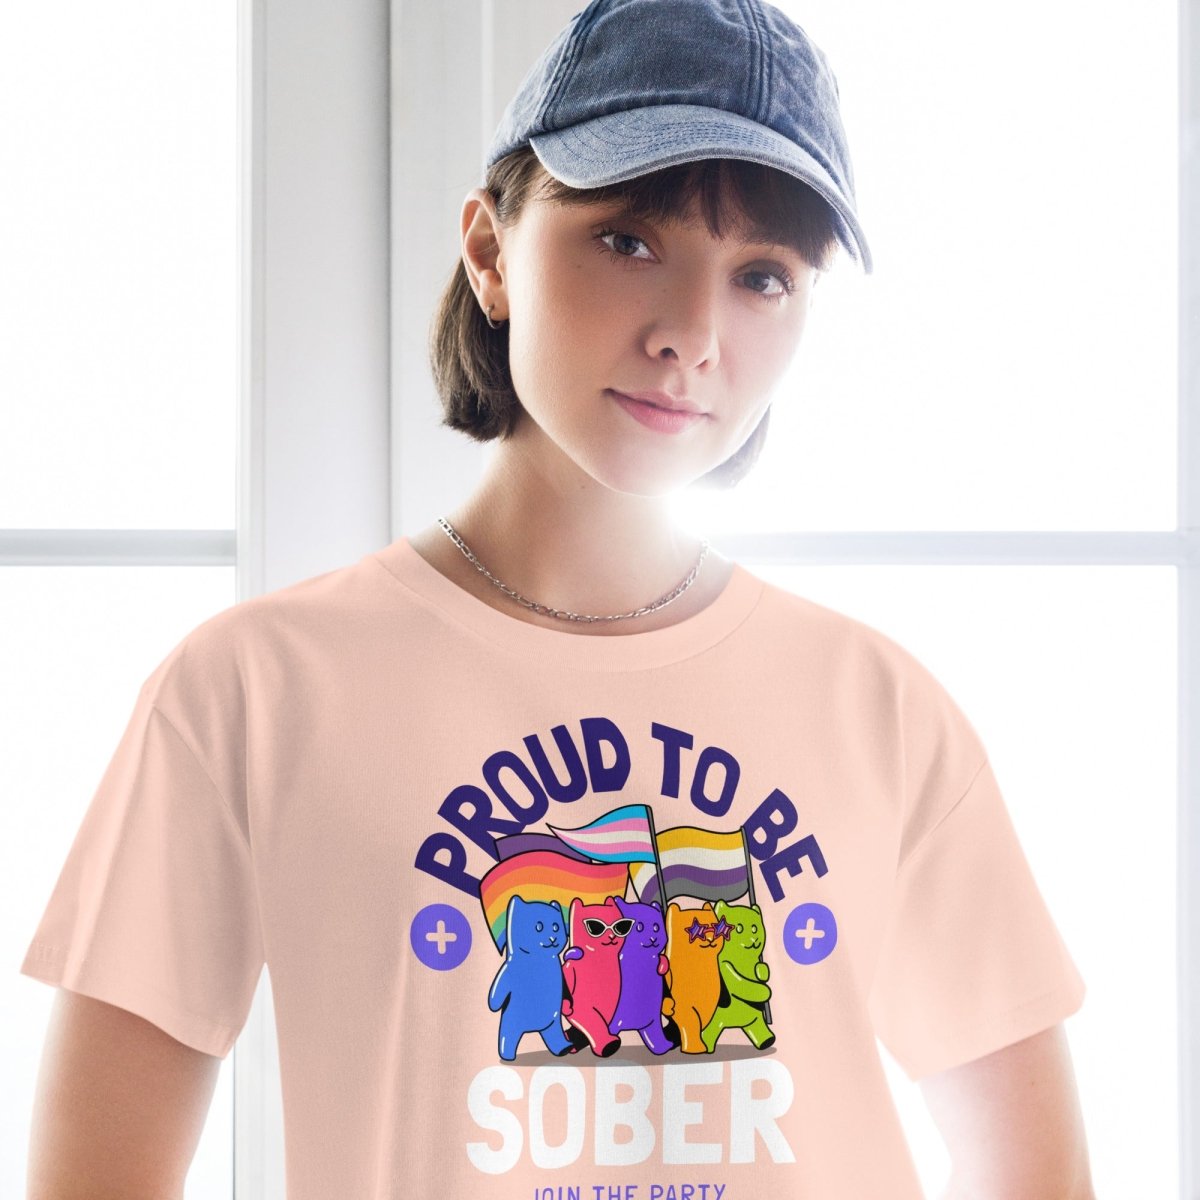 "Proud to be Sober" Women's Crop Top - Rainbow Resilience Collection - | Sobervation